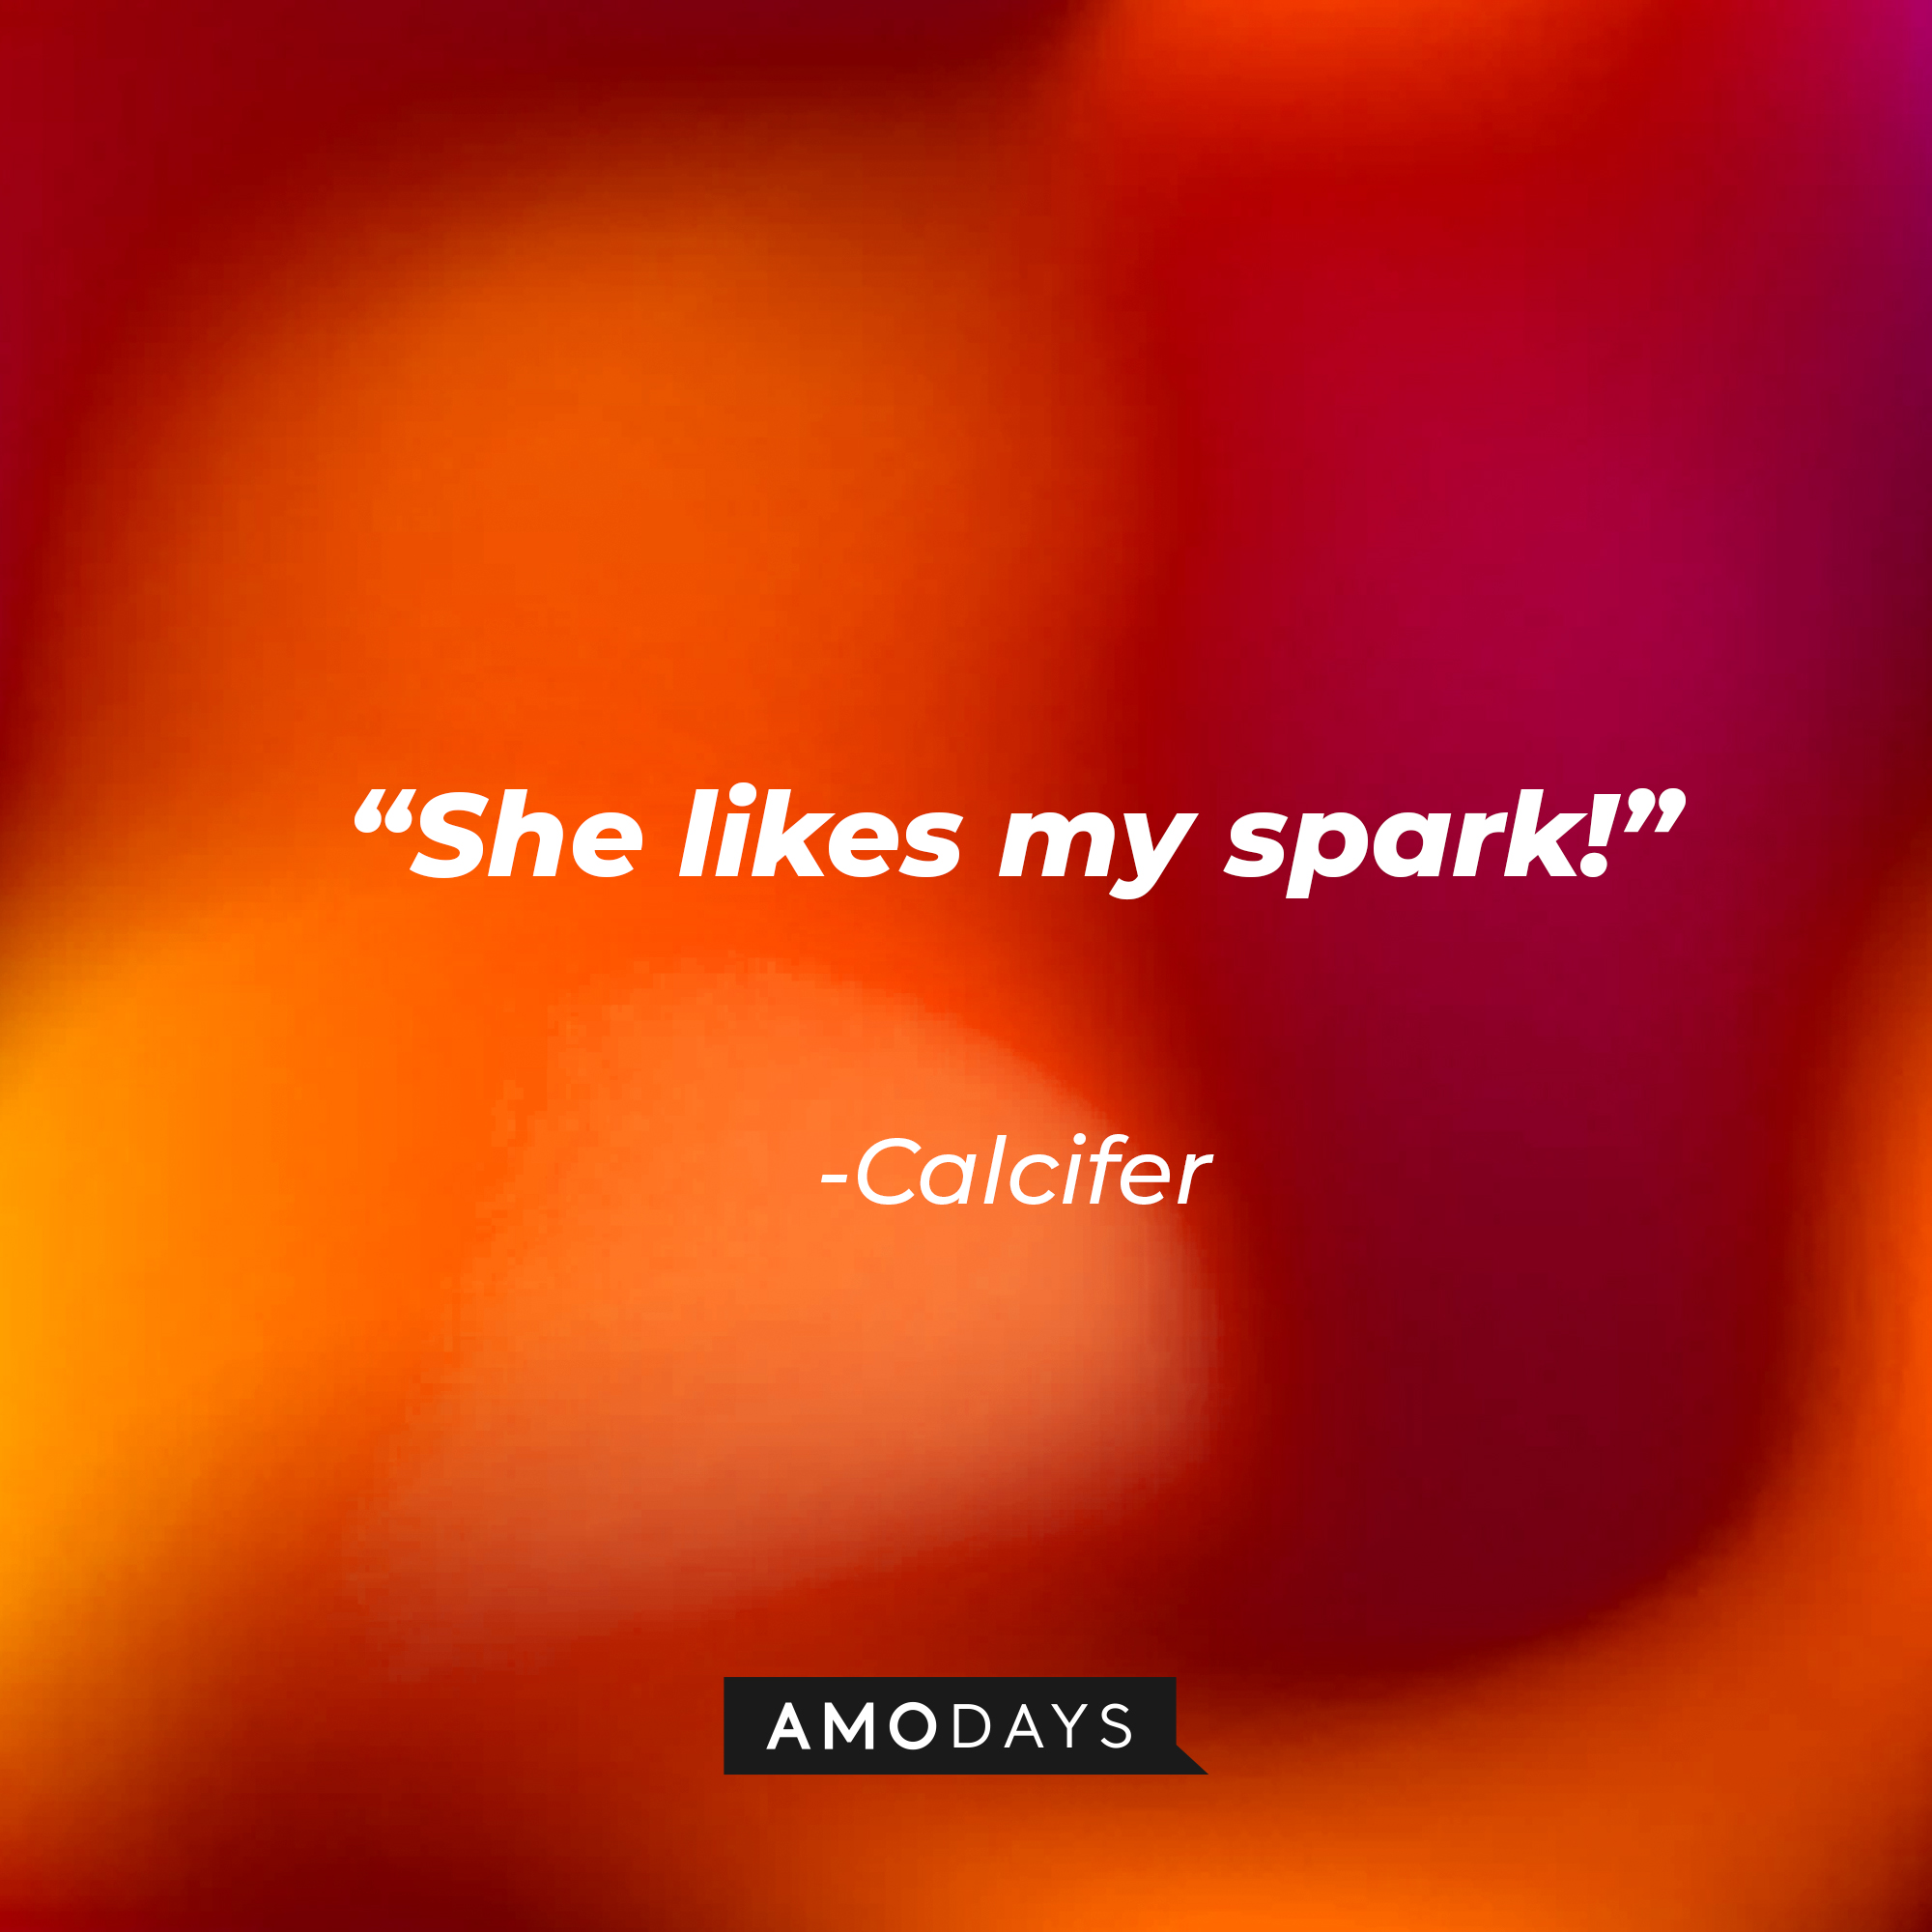 Calcifer’s quote: “She likes my spark!” | Source: AmoDays